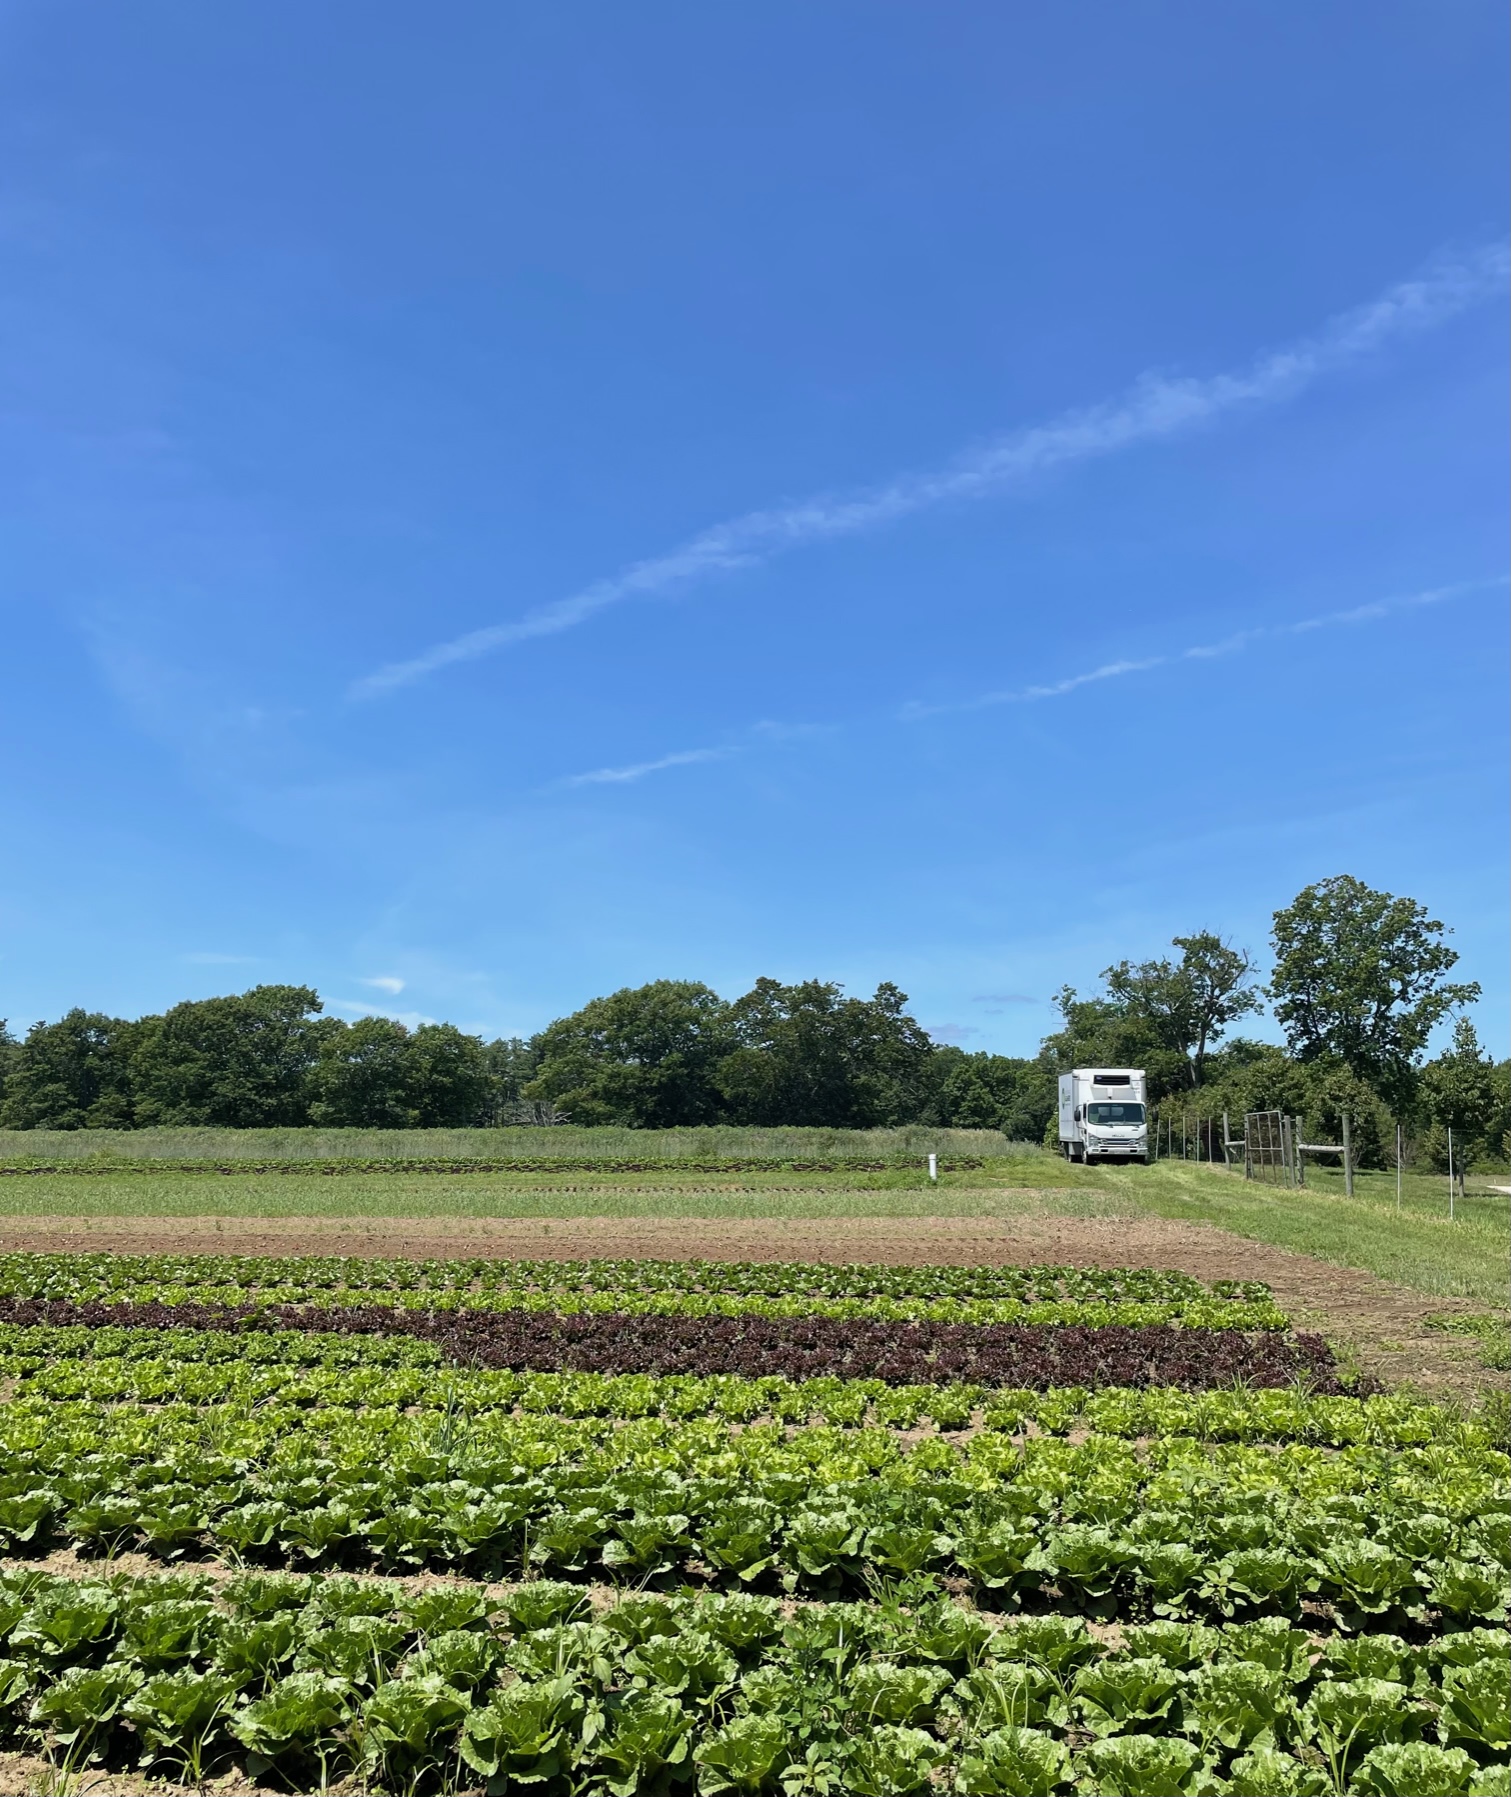 Green field full of greens and produce in rows at Appleton Farms under a blue sky